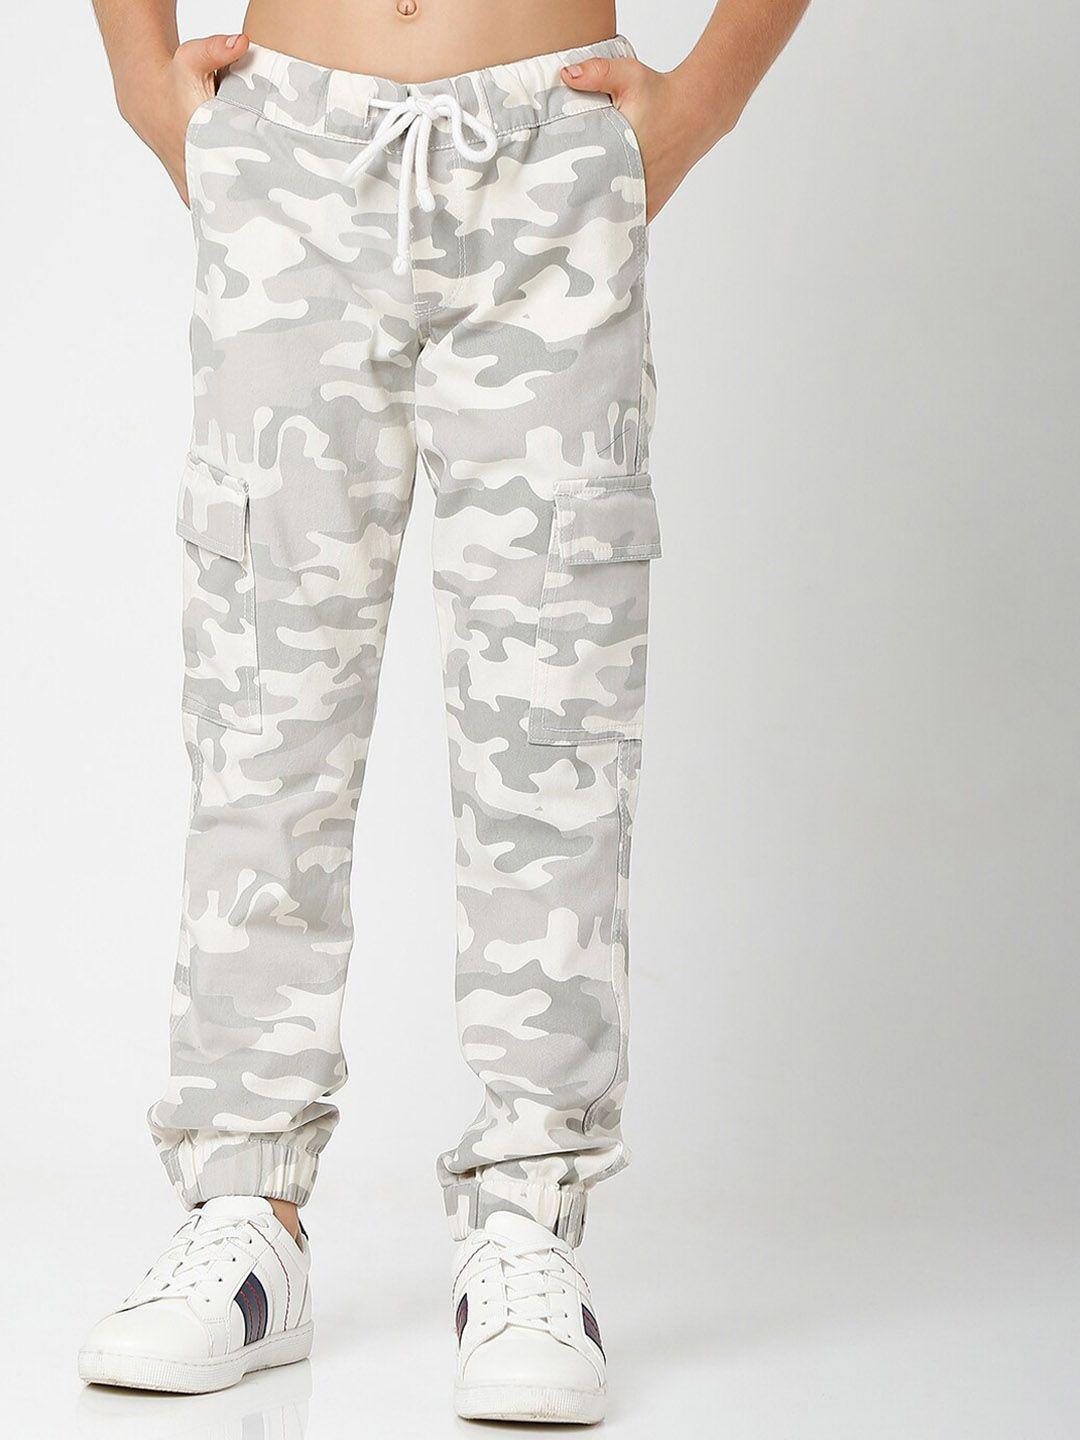 gas-boys-camouflage-printed-slim-fit-cotton-cargos-trouser